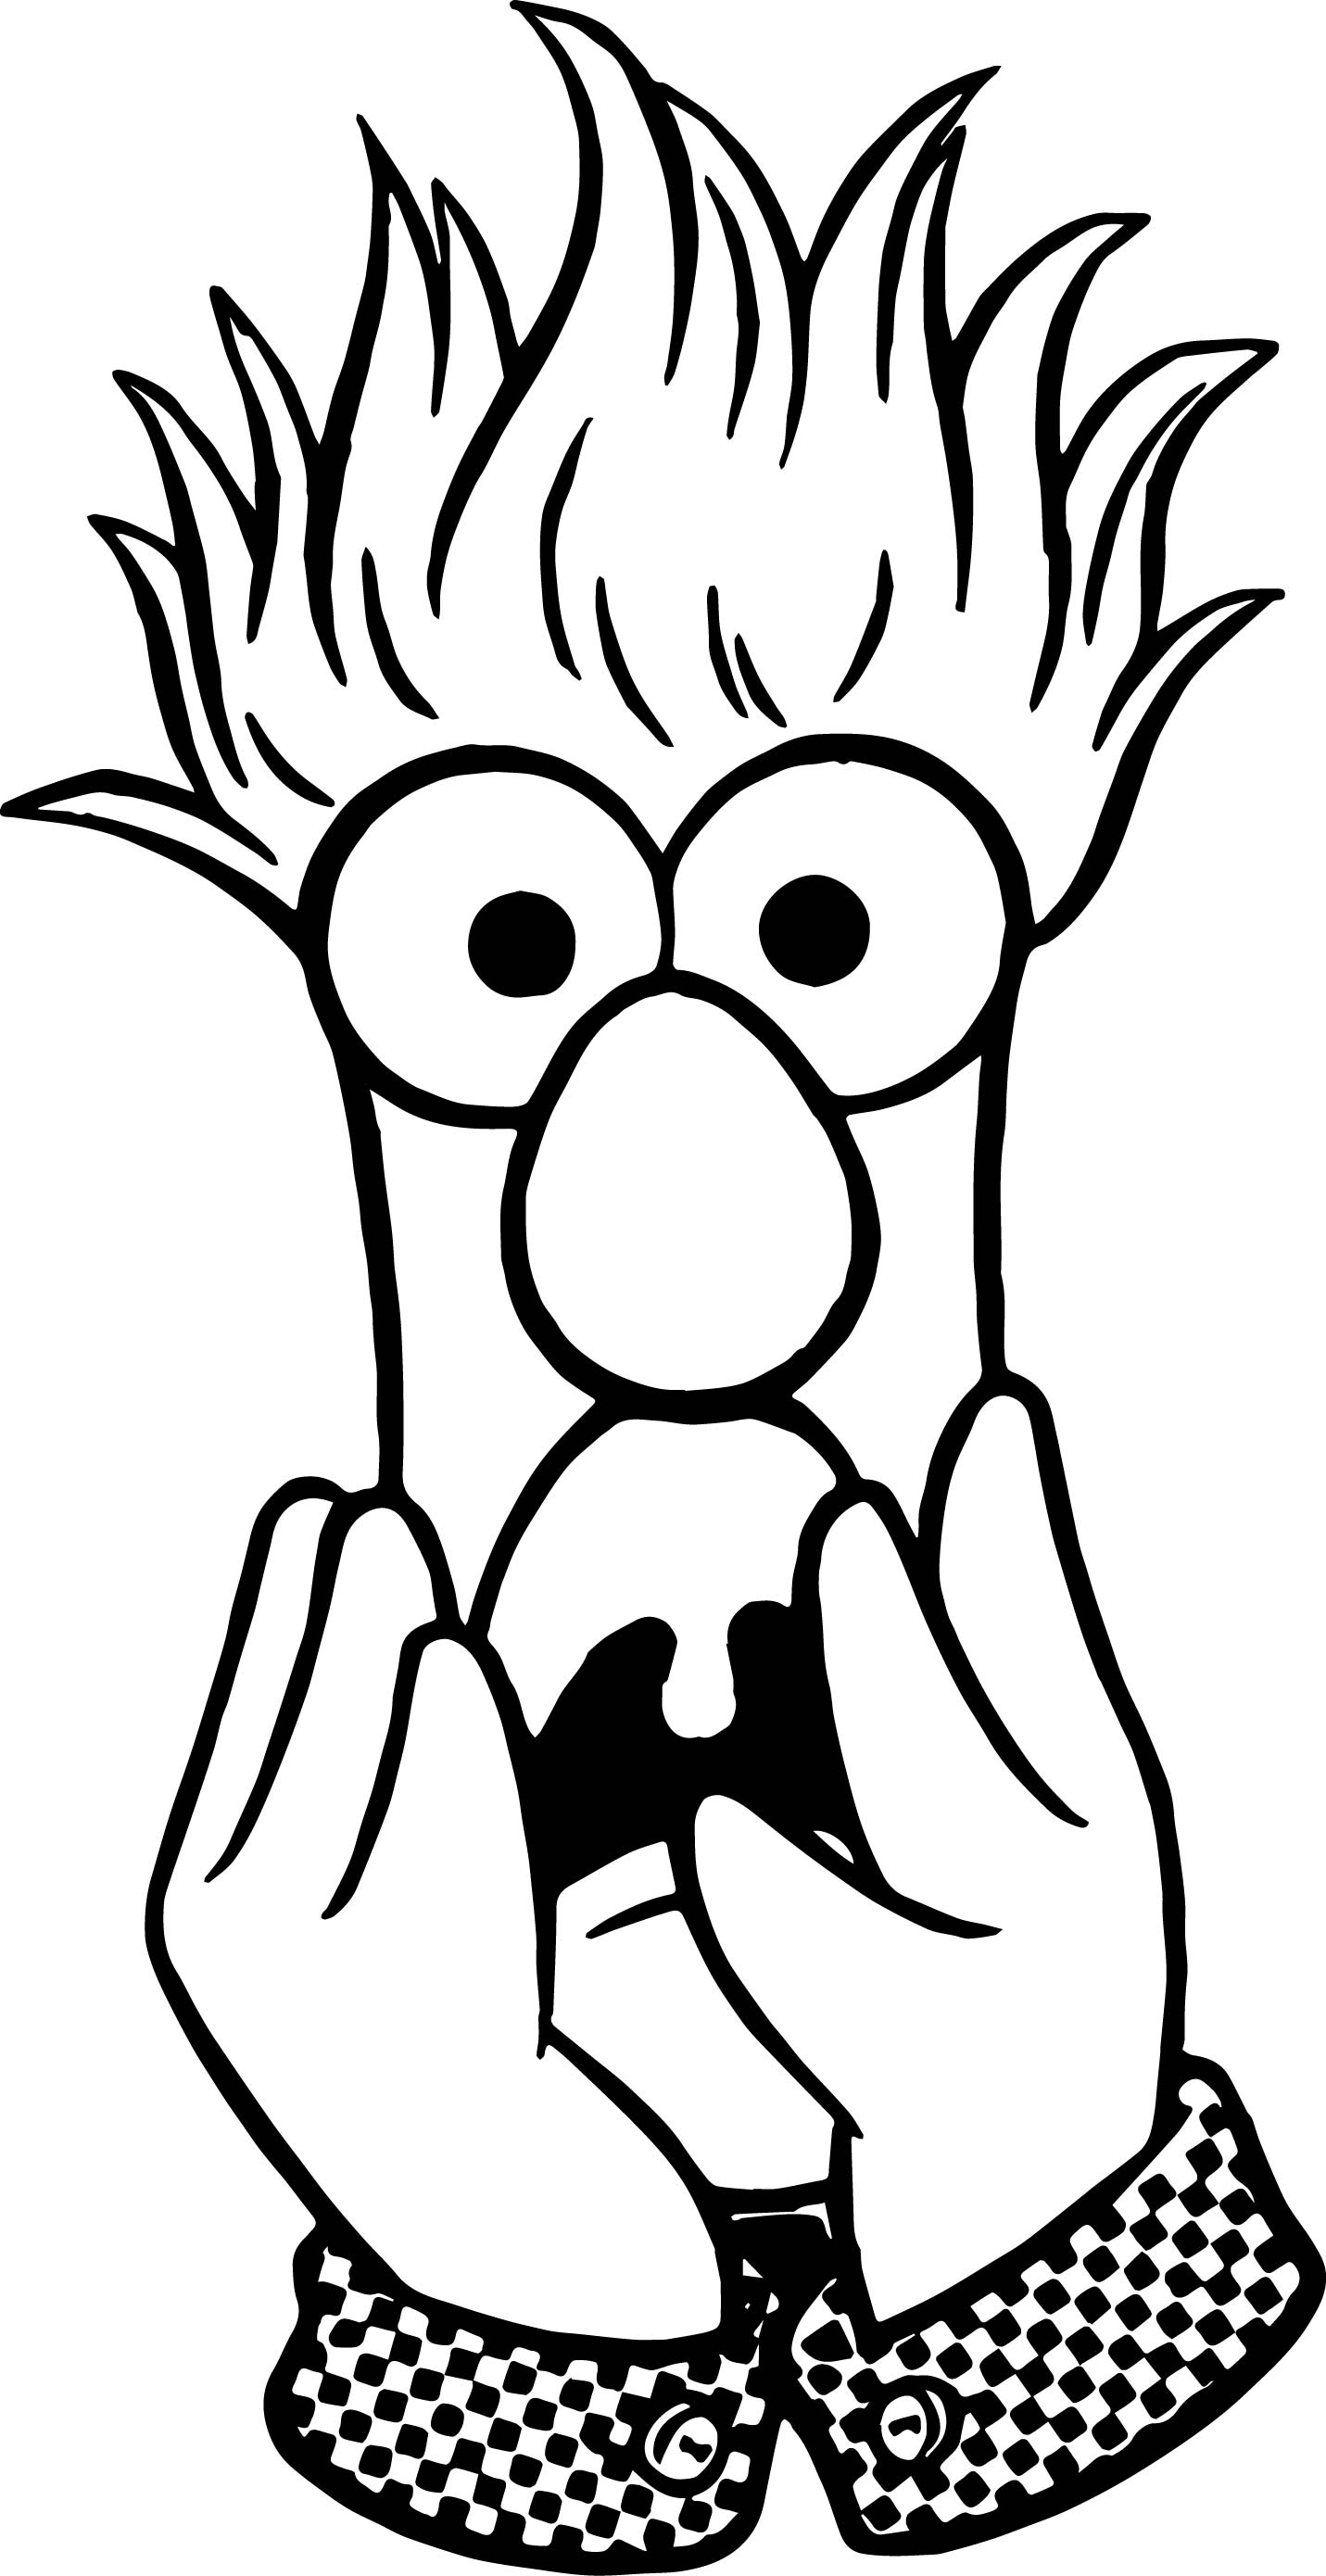 muppets-most-wanted-coloring-pages-at-getdrawings-free-download